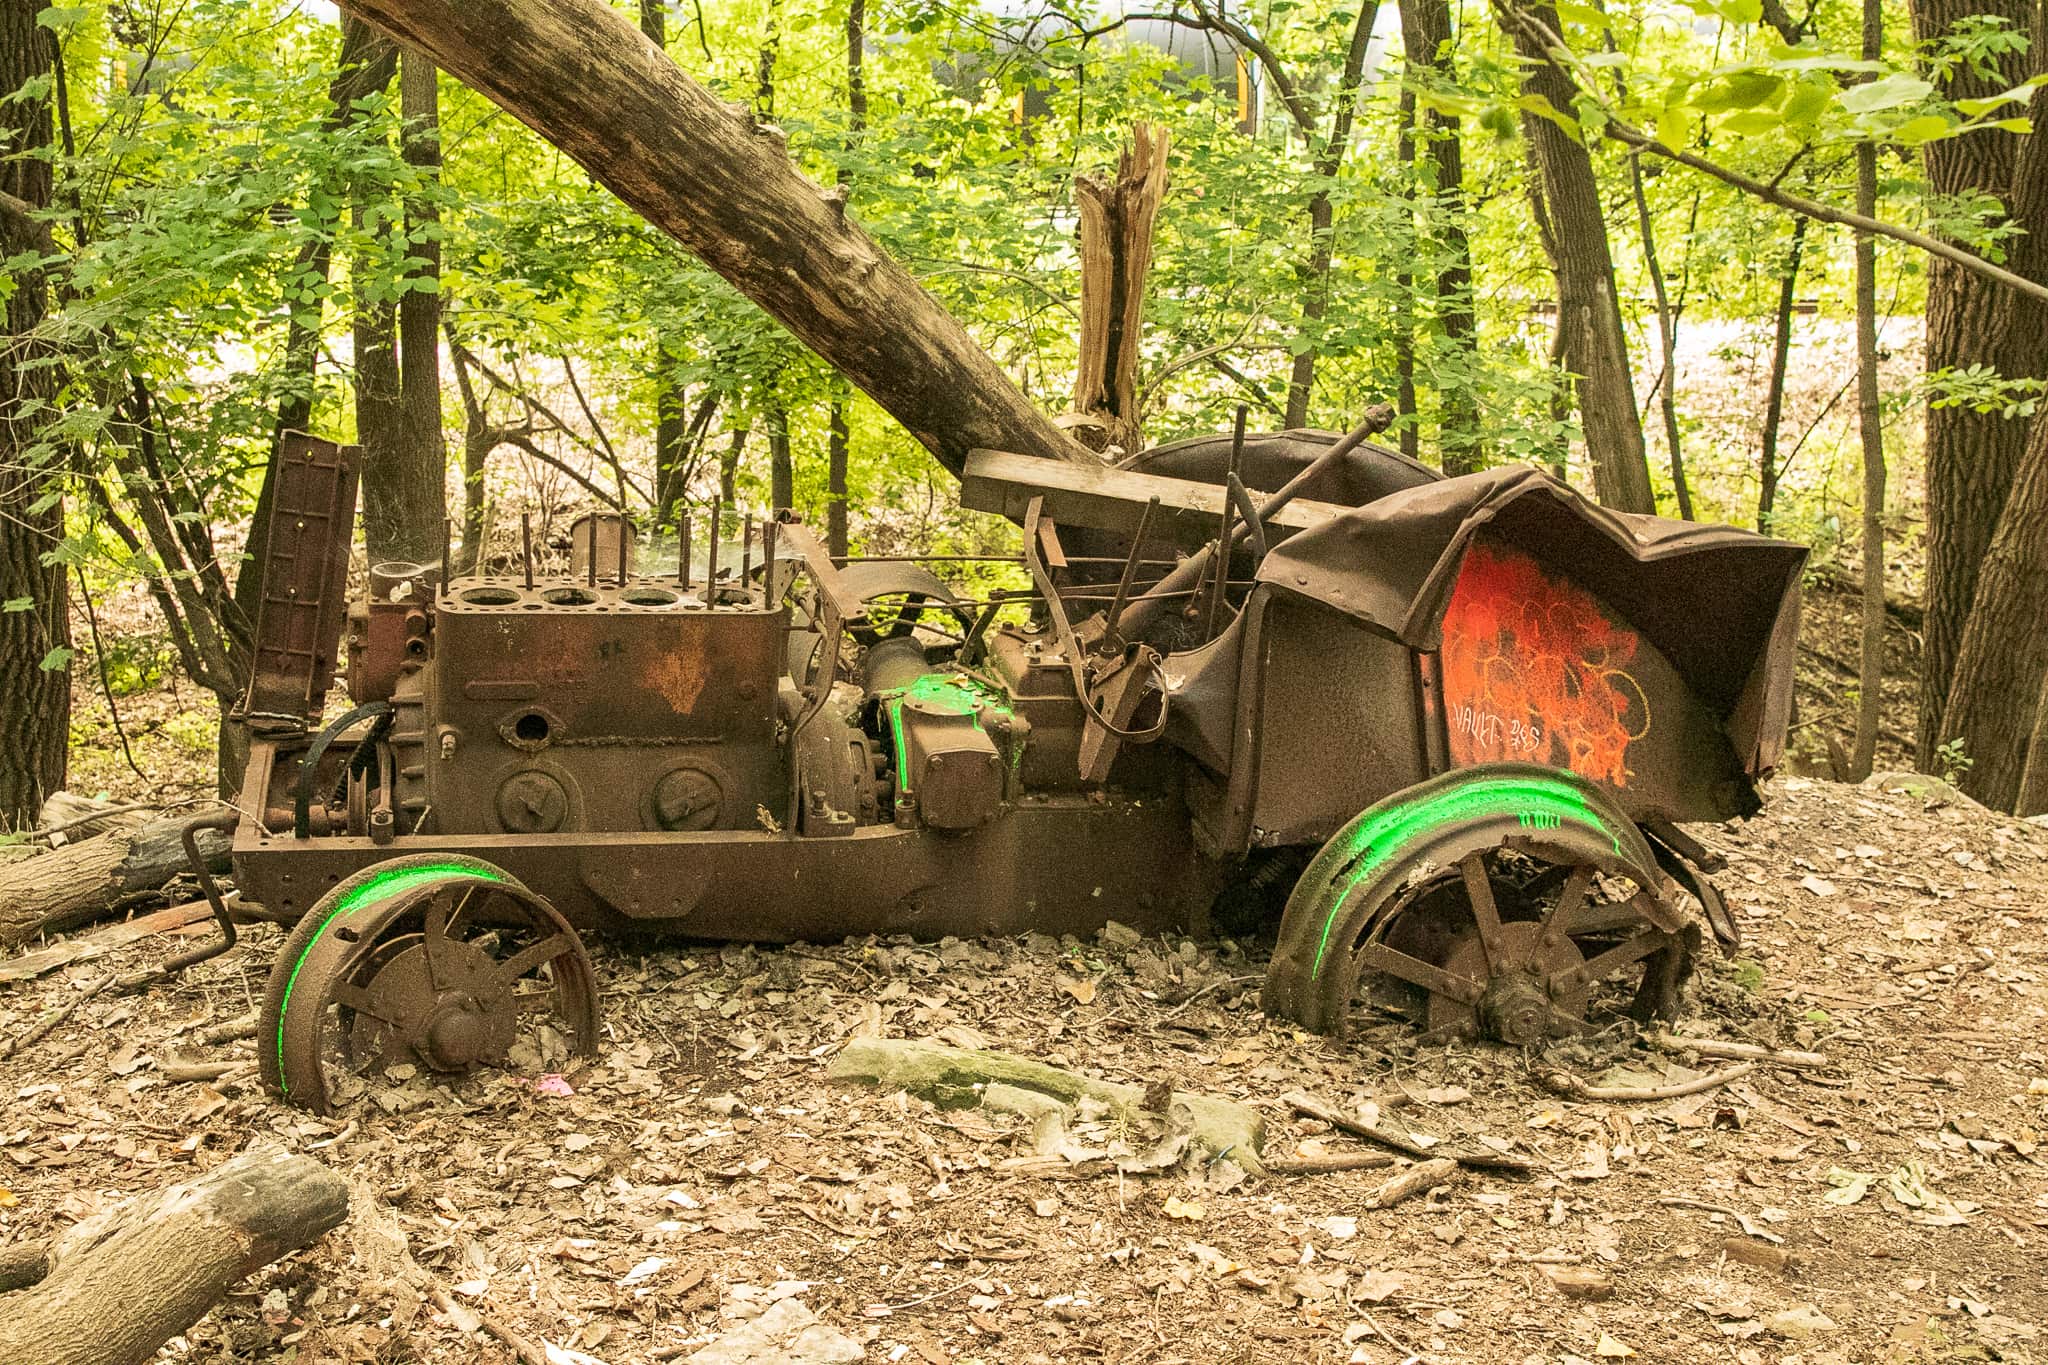 An unexpected relic, the rusting carcass of a vehicle - perhaps a tractor - sits just off the trail.